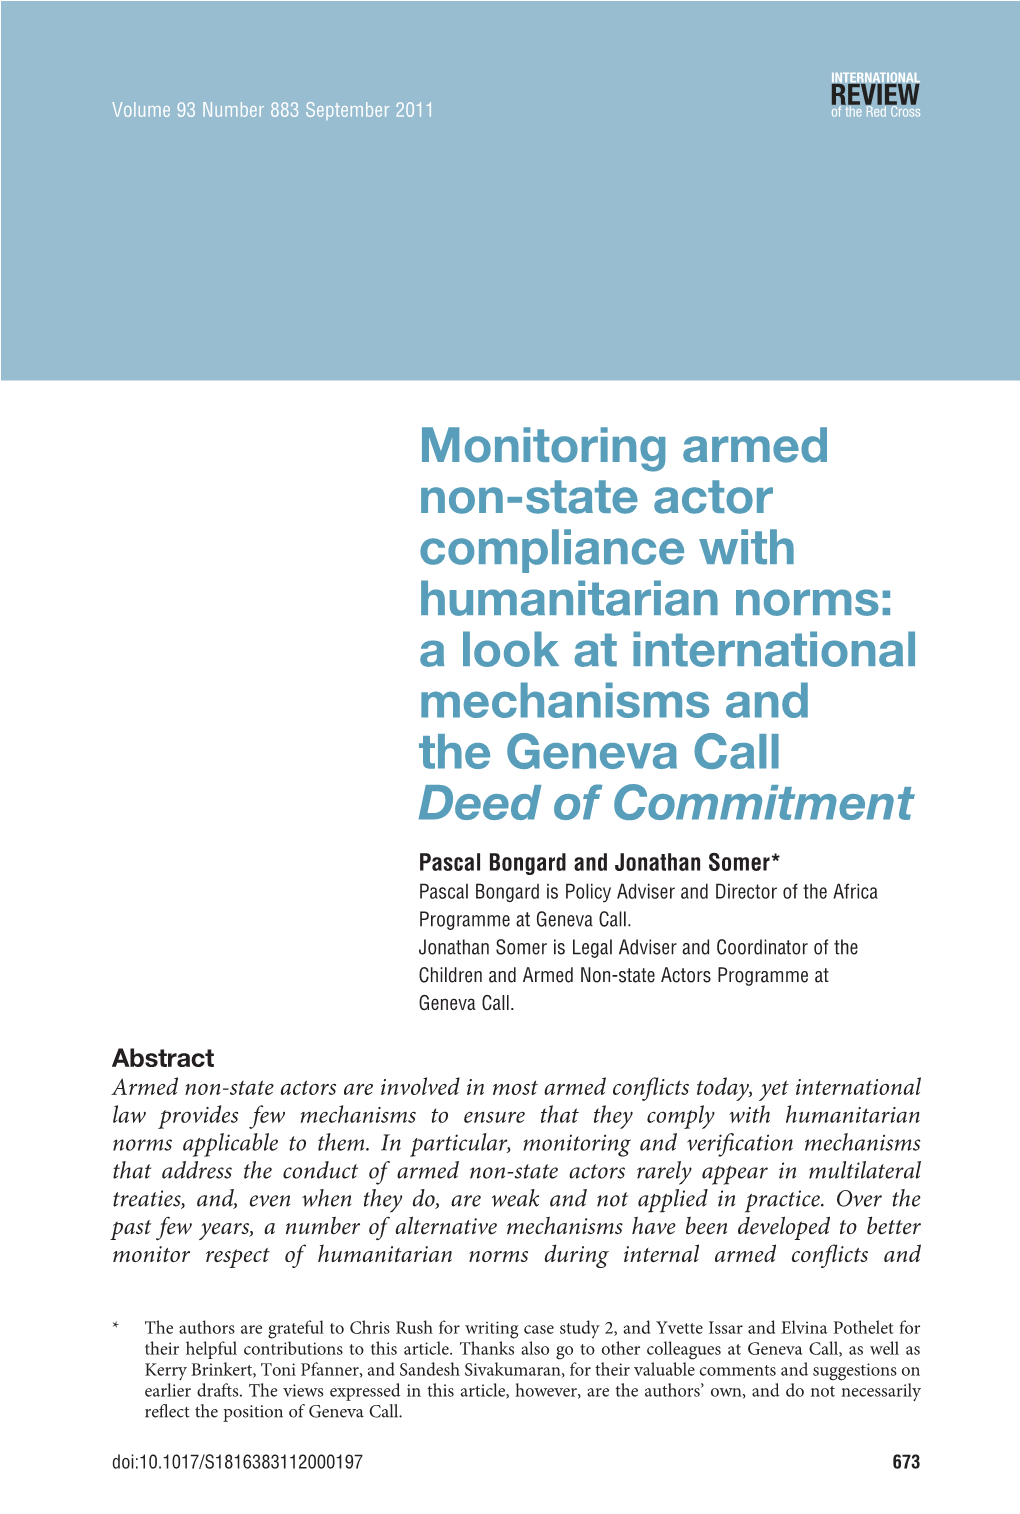 Monitoring Armed Non-State Actor Compliance with Humanitarian Norms: a Look at International Mechanisms and the Geneva Call Deed